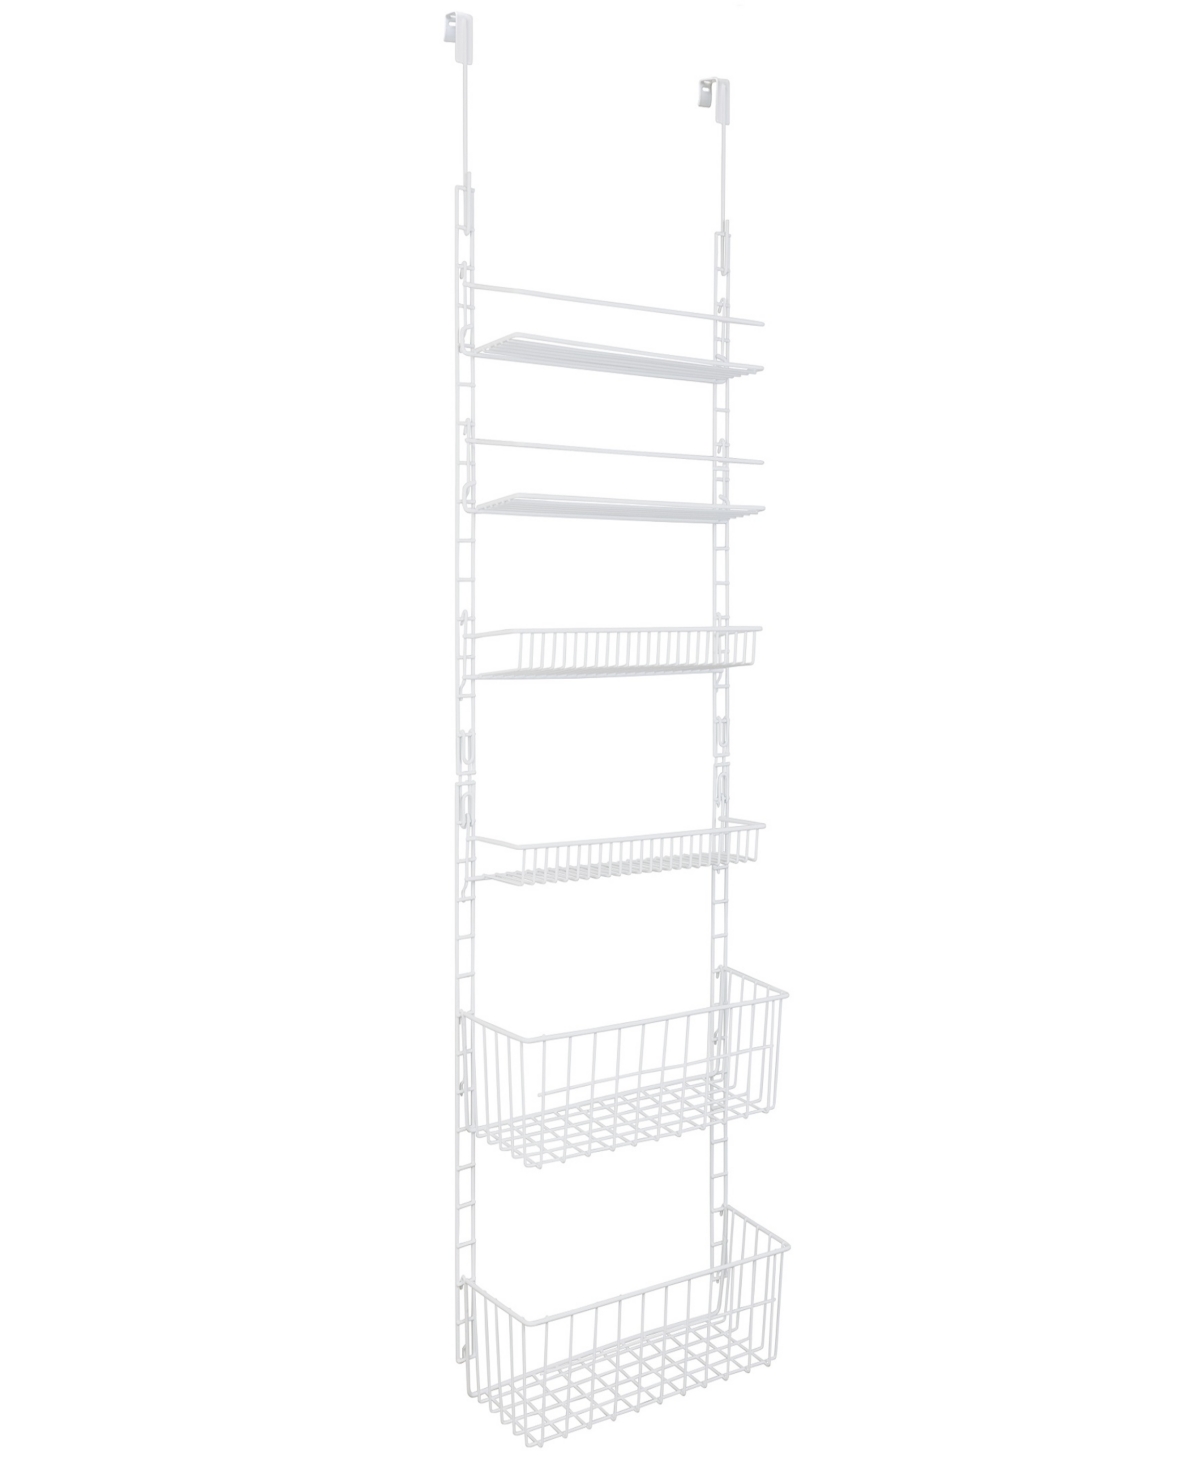 6-Tier Over the Door Pantry Organizer Rack with Adjustable Shelves - White